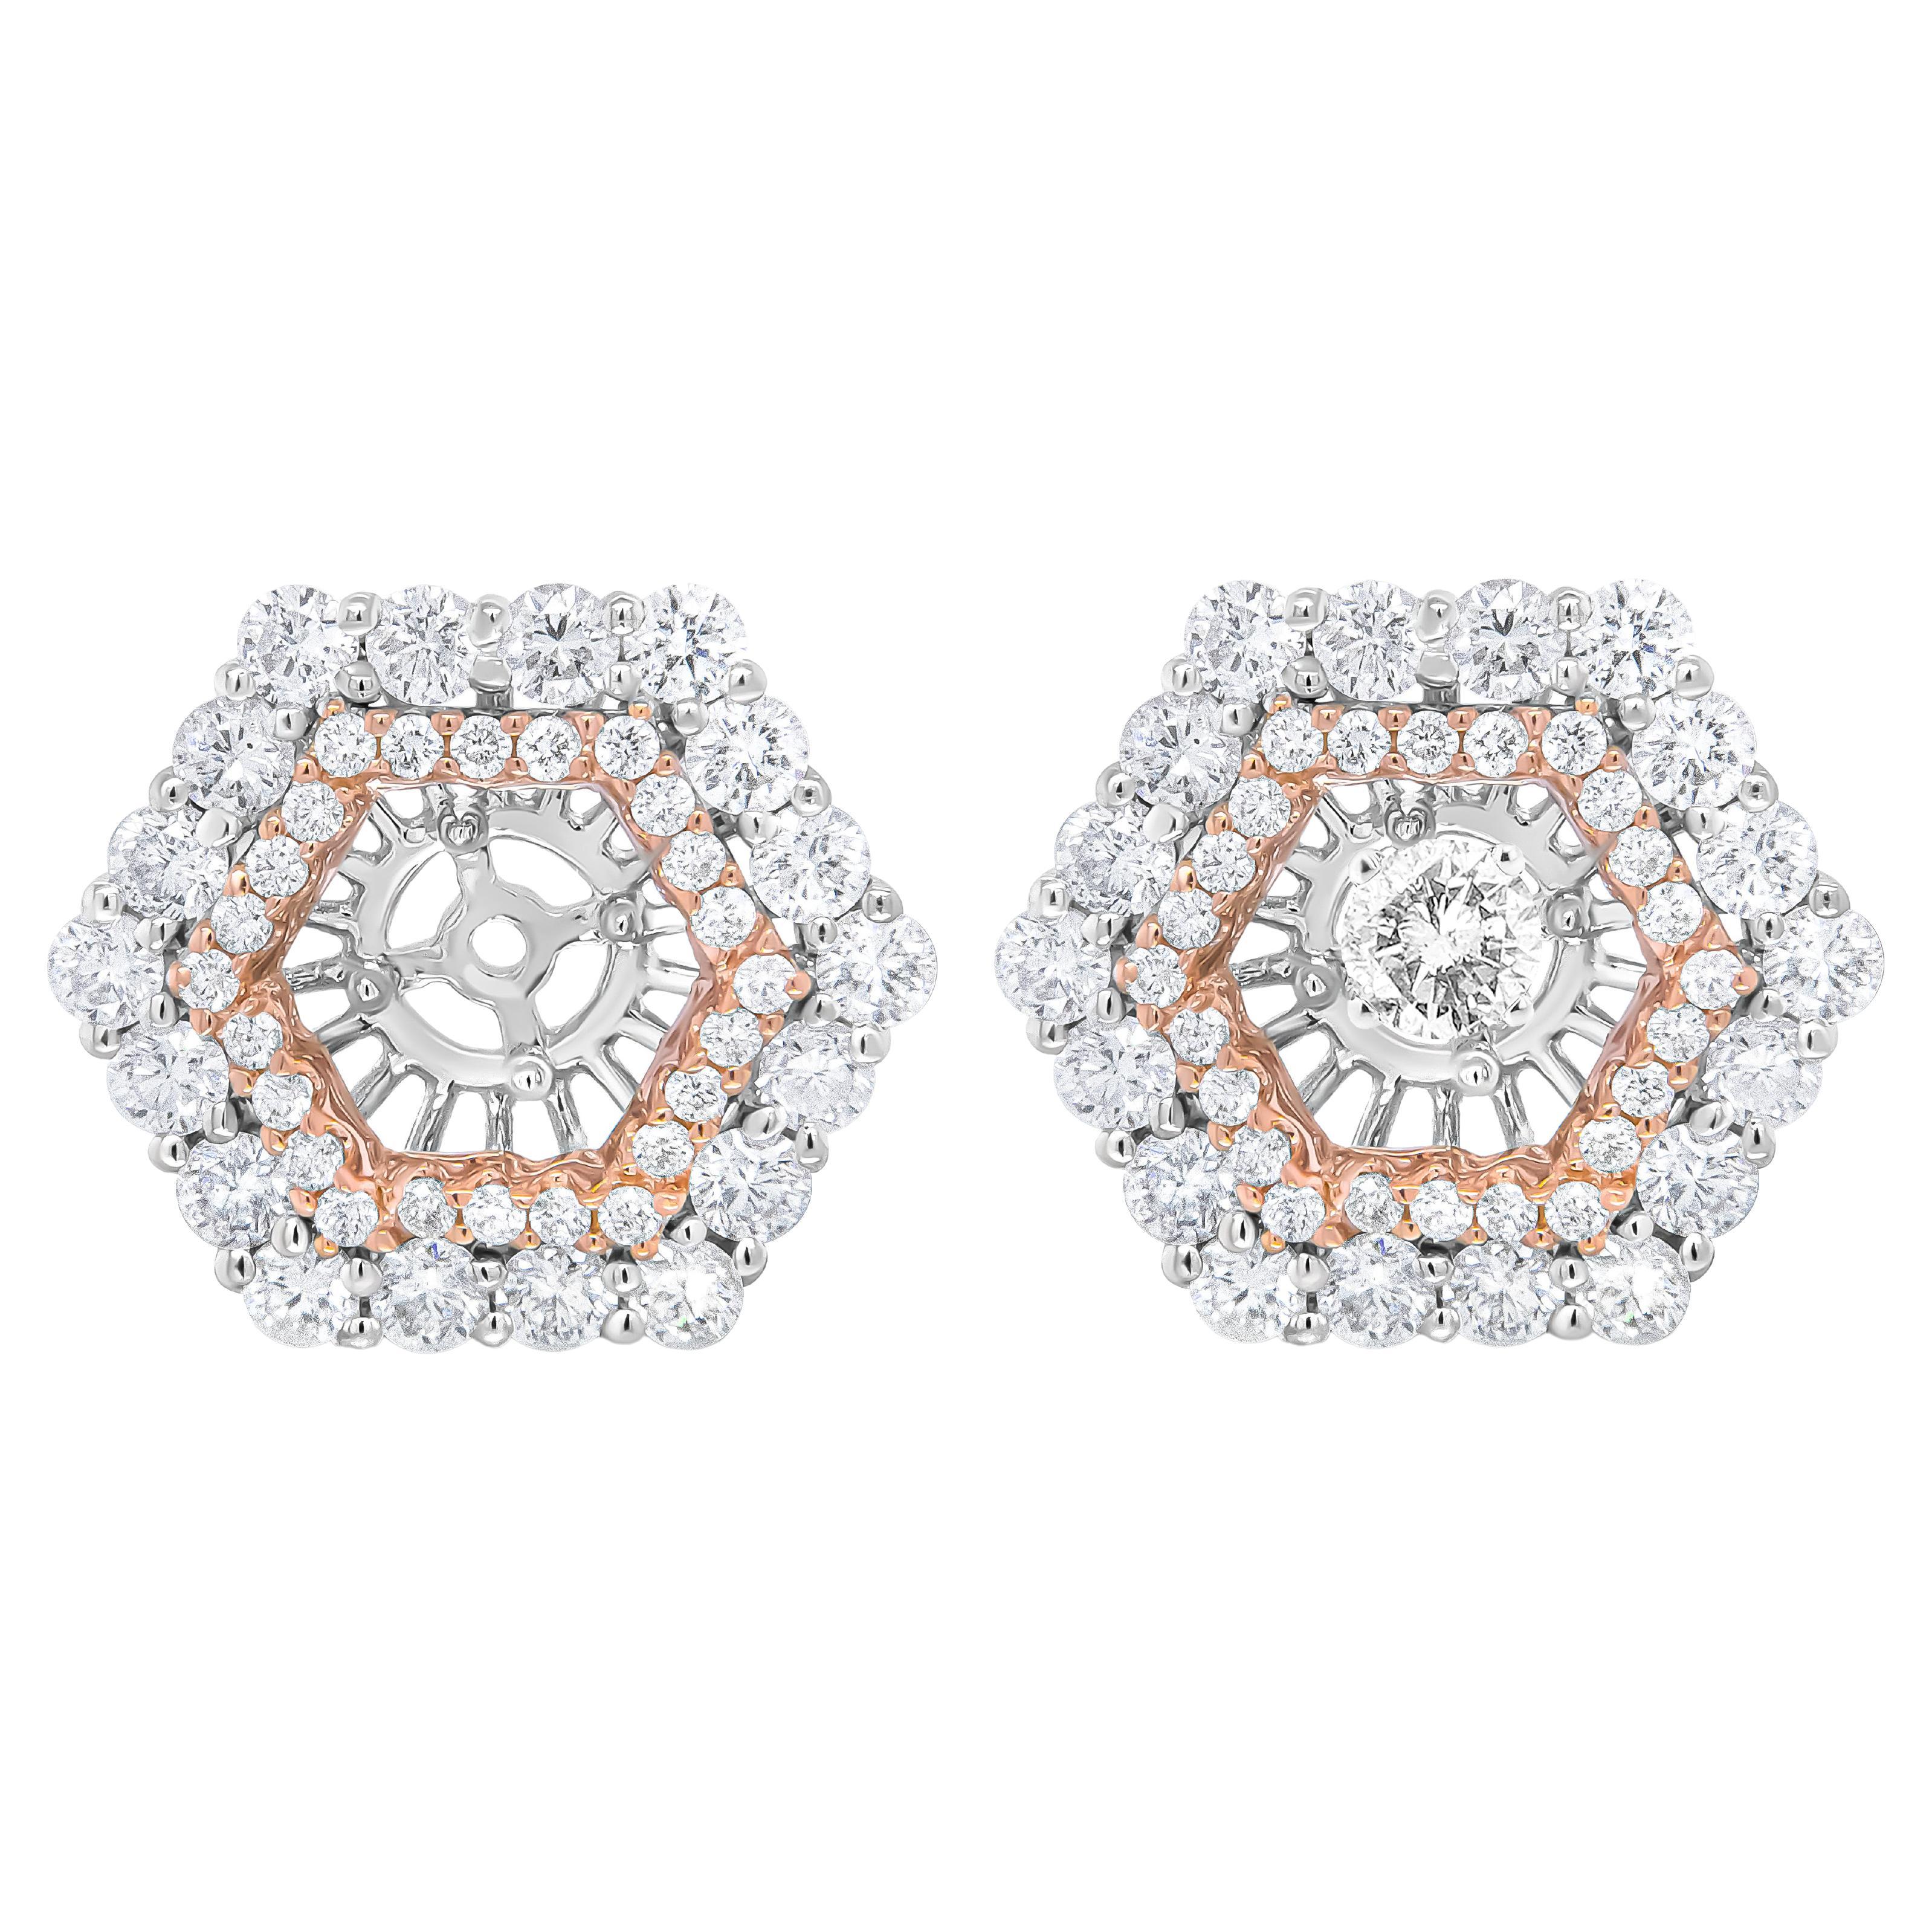 14K Rose and White Gold 1 7/8 Carat Diamond Double Halo Earring Jacket for Studs